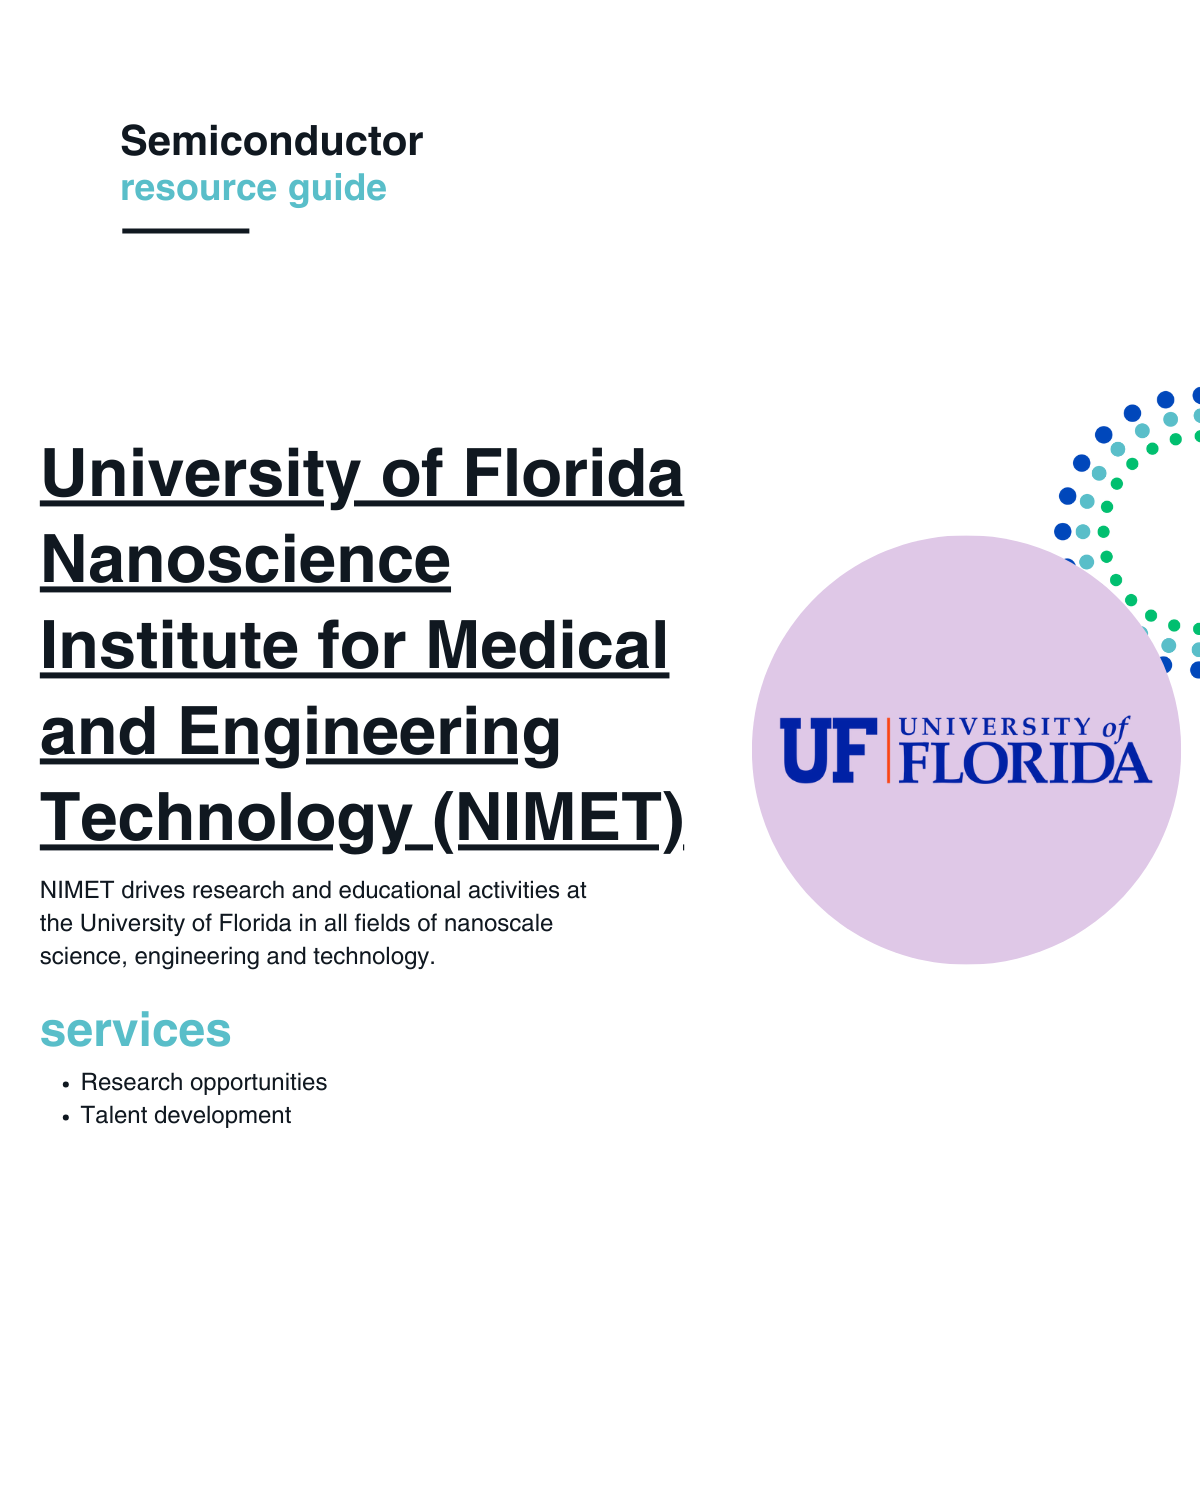 NIMET drives research and educational activities at the University of Florida in all fields of nanoscale science, engineering and technology.